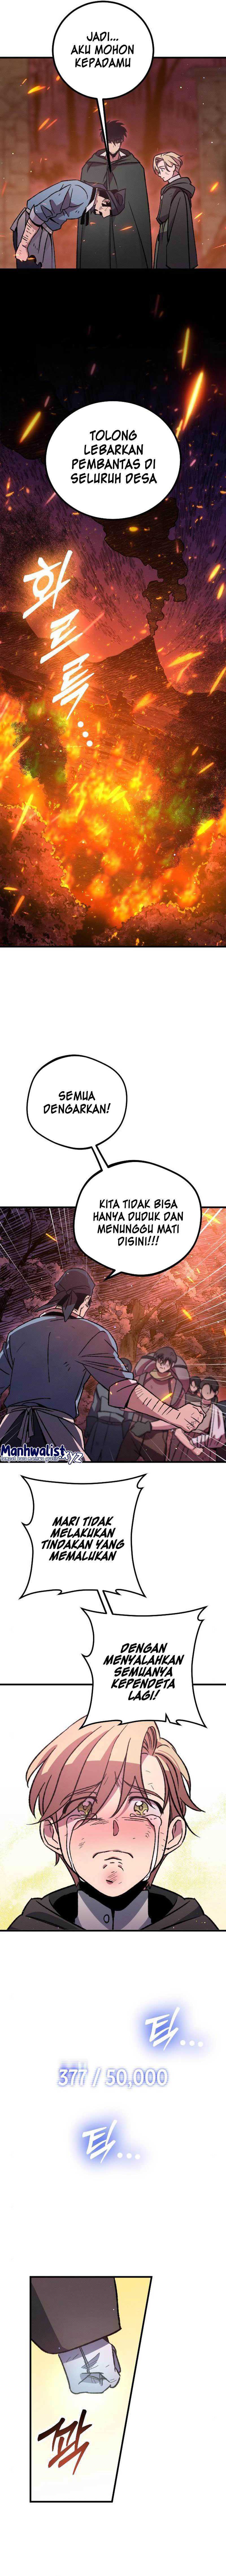 Manager Seo Industrial Acciden Chapter 06